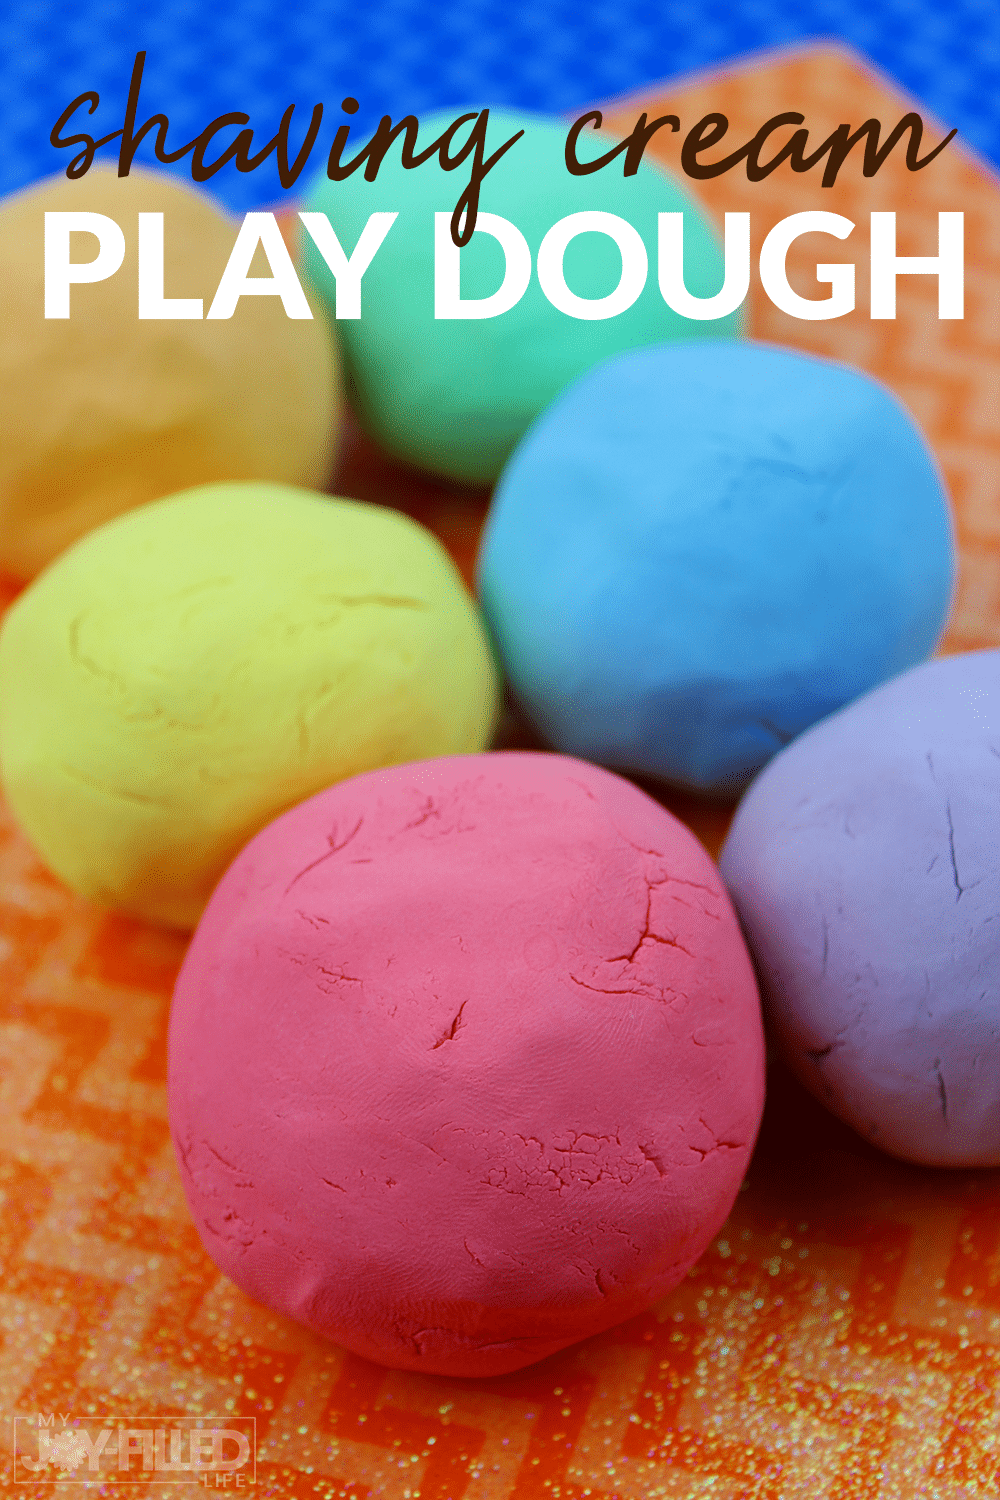 This shaving cream playdough is one of our favorite homemade playdough recipes! Kids will have SOOOOO much fun helping with this fun playdough activity. #sensoryplay #playdough #homemadeplaydough